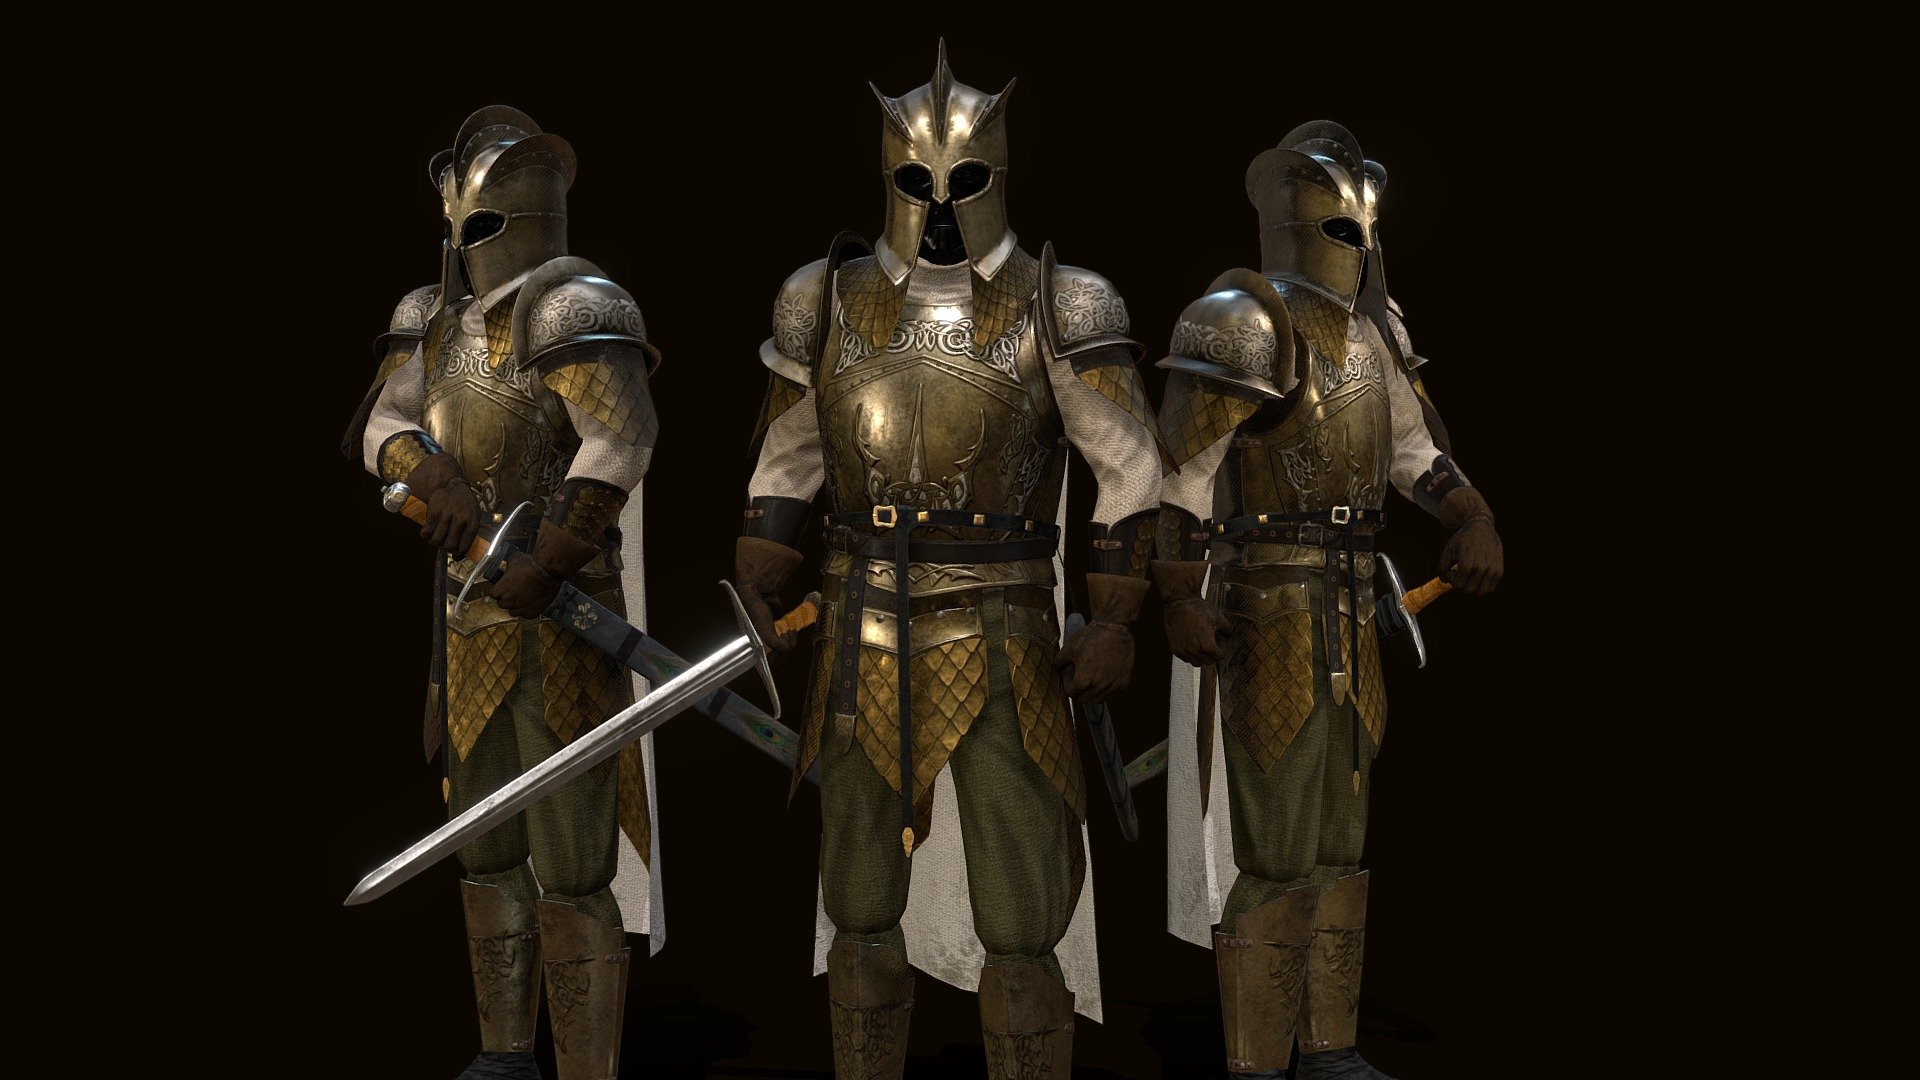 Game of Thrones Kingsguard Armor from Seasons 1-3. Made fow M&amp;B Warband mod A Clash of Kings
https://www.moddb.com/mods/a-clash-of-kings - Game of Thrones Kingsguard Armor (Season 1-3) - 3D model by avelium 3d model